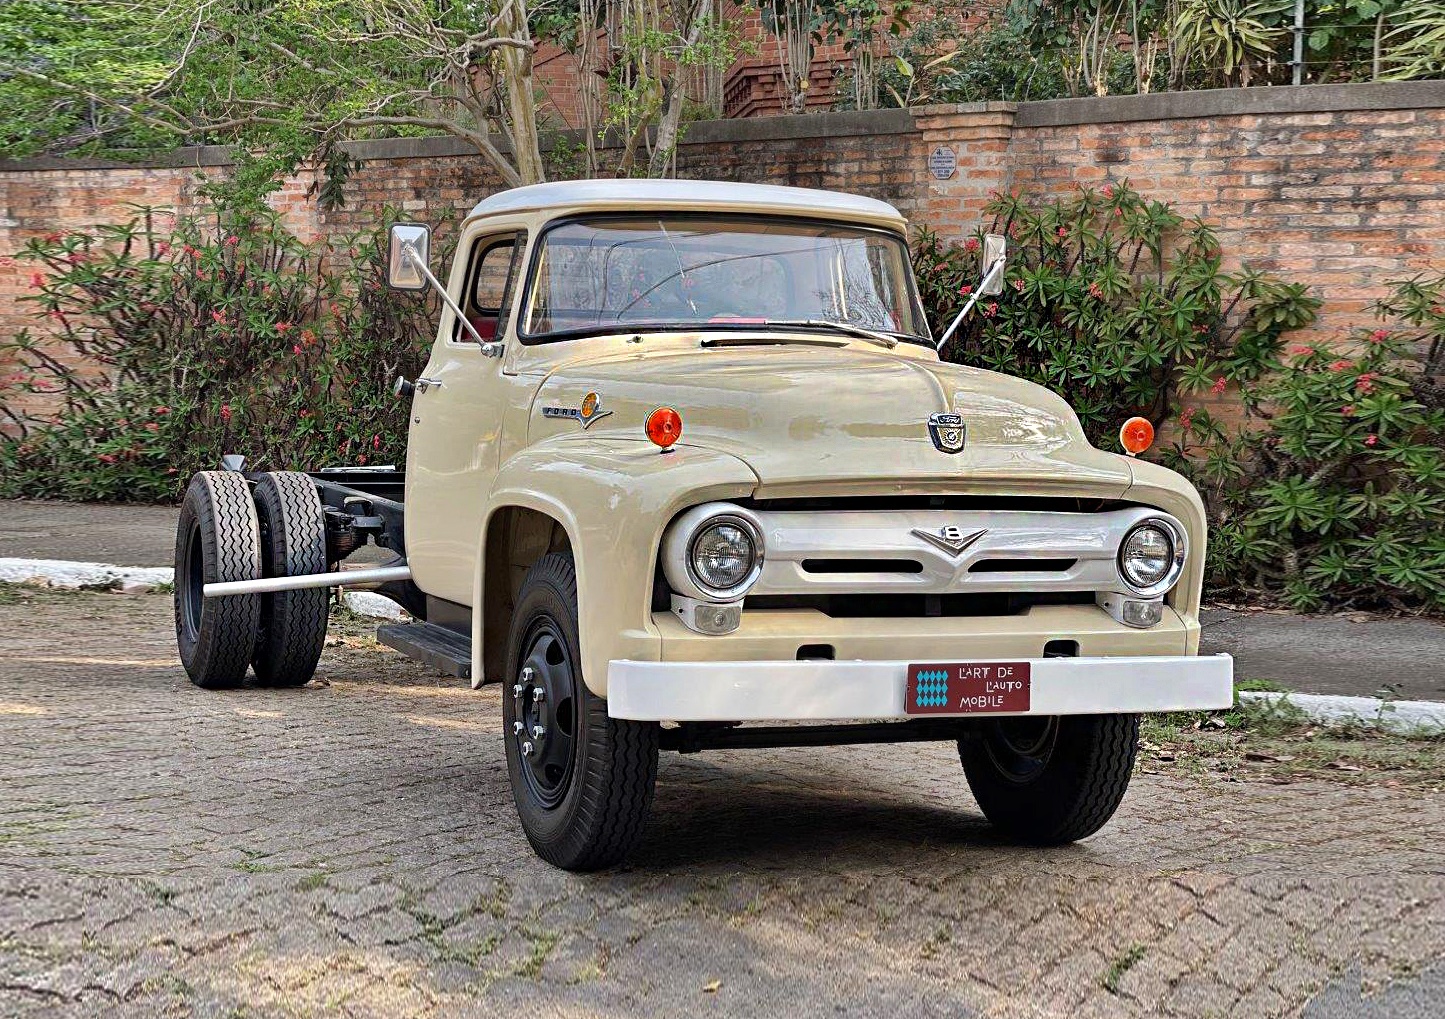 FORD F-600